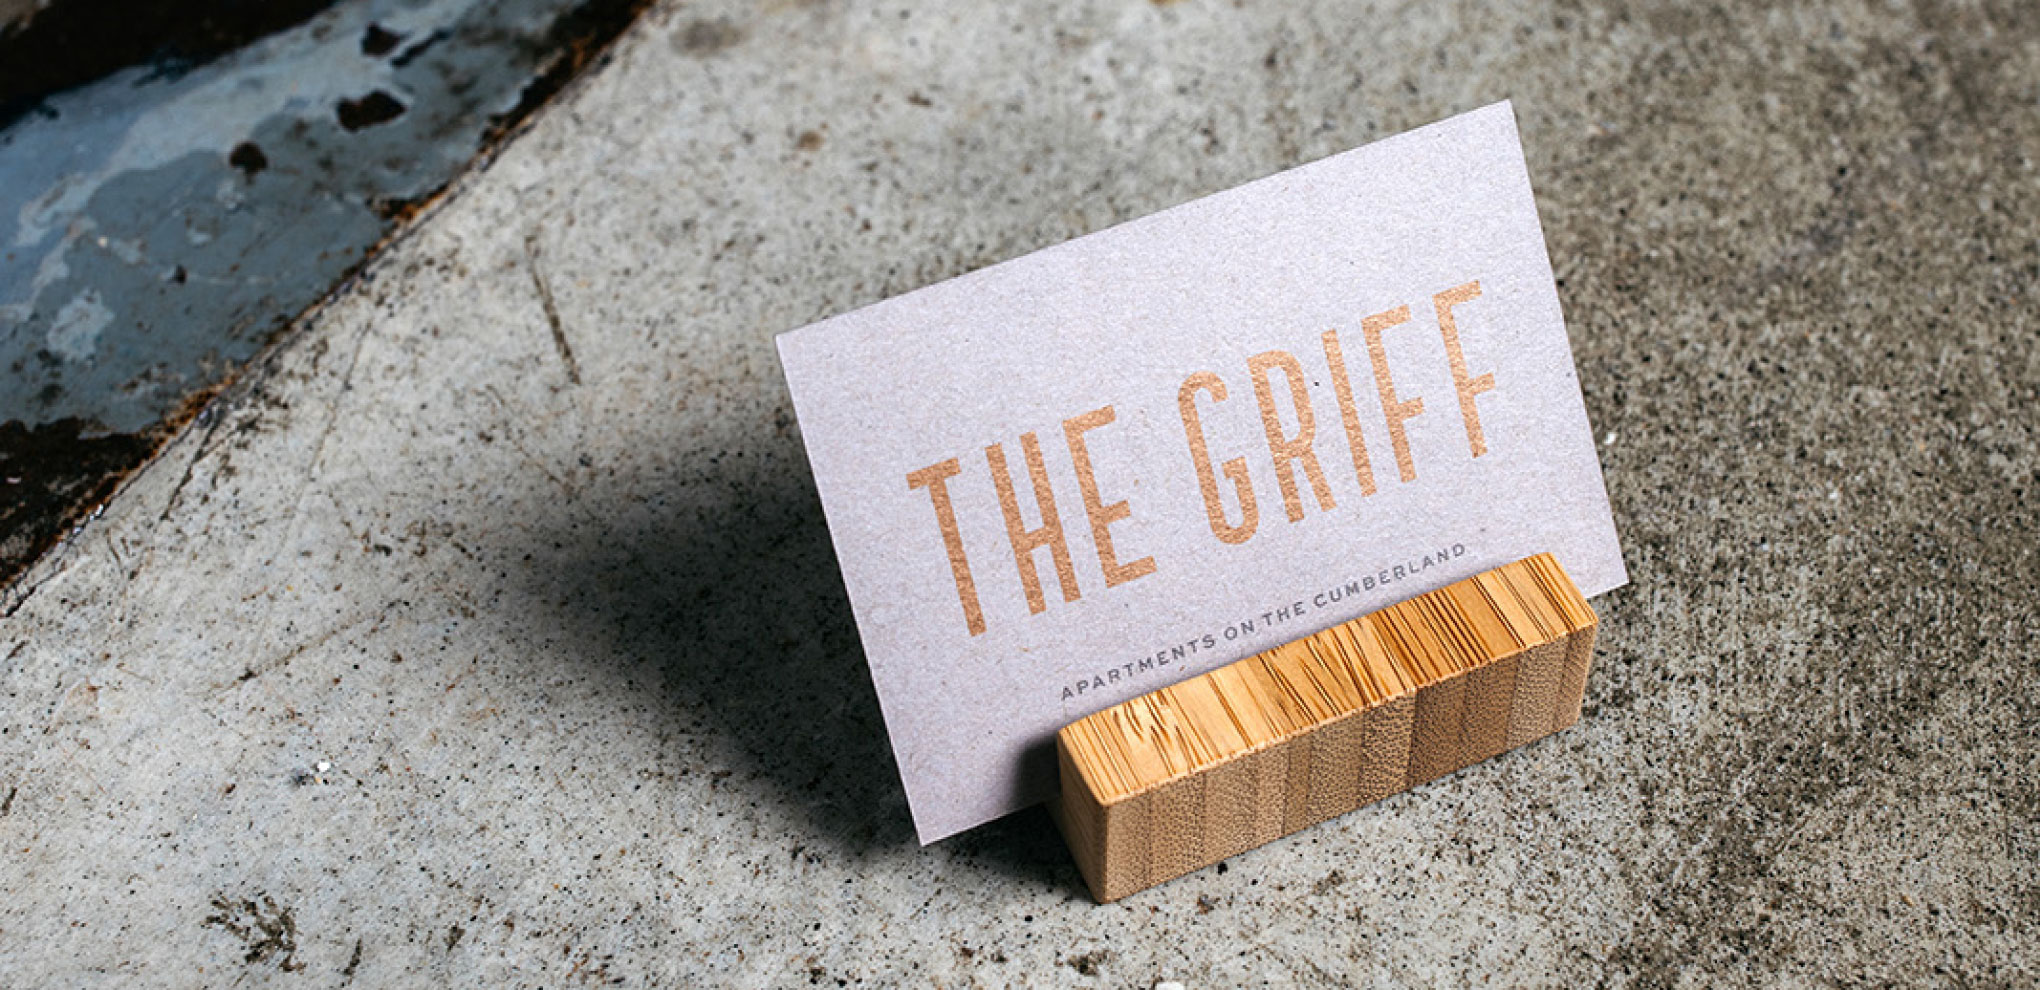 The Griff